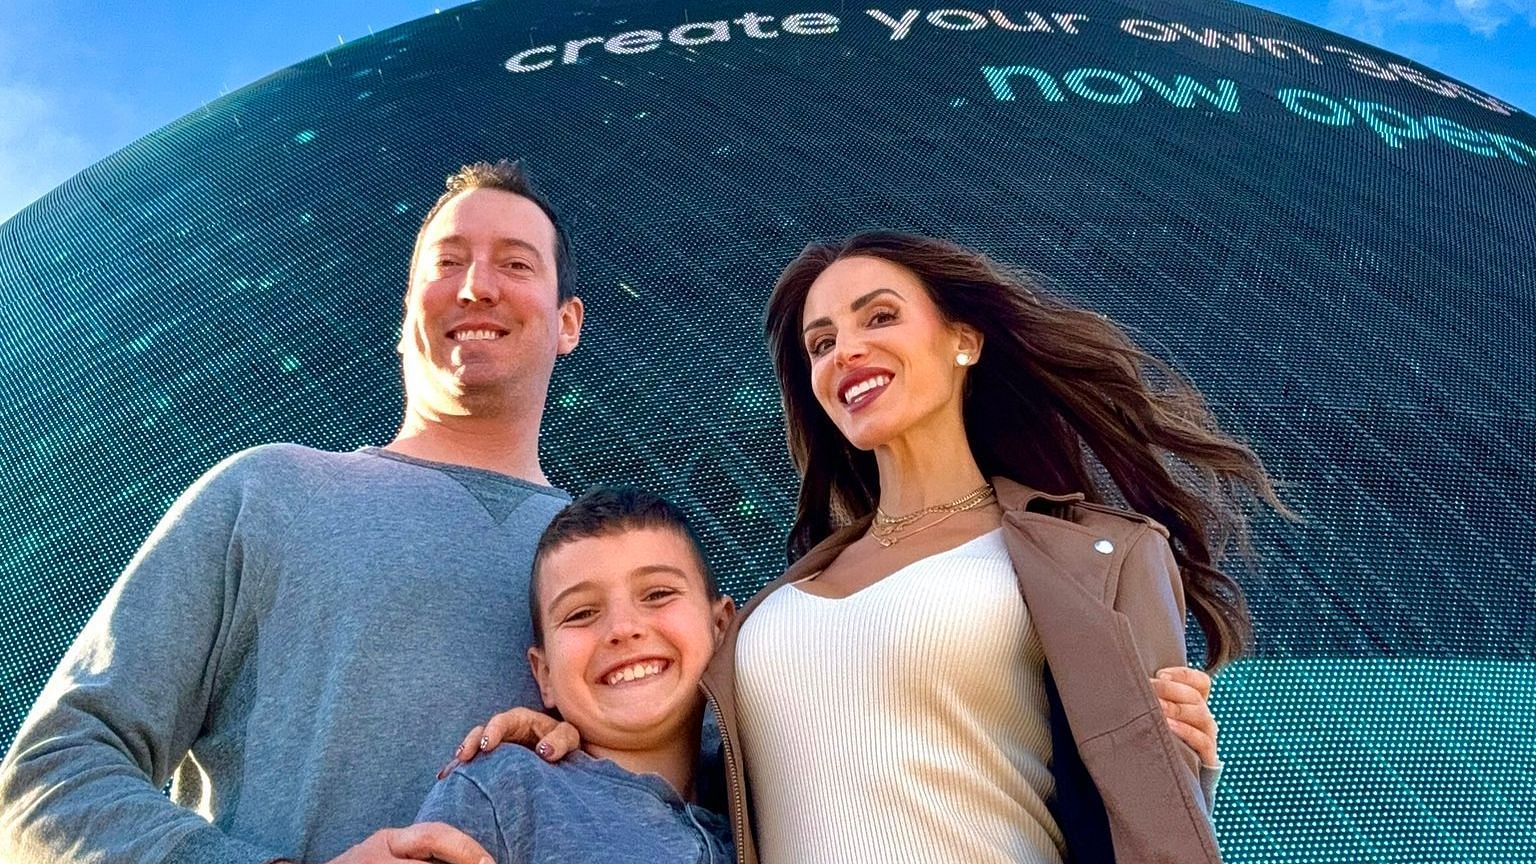 Kyle Busch and family visit The Sphere in Las Vegas ahead of NASCAR Cup Series race 